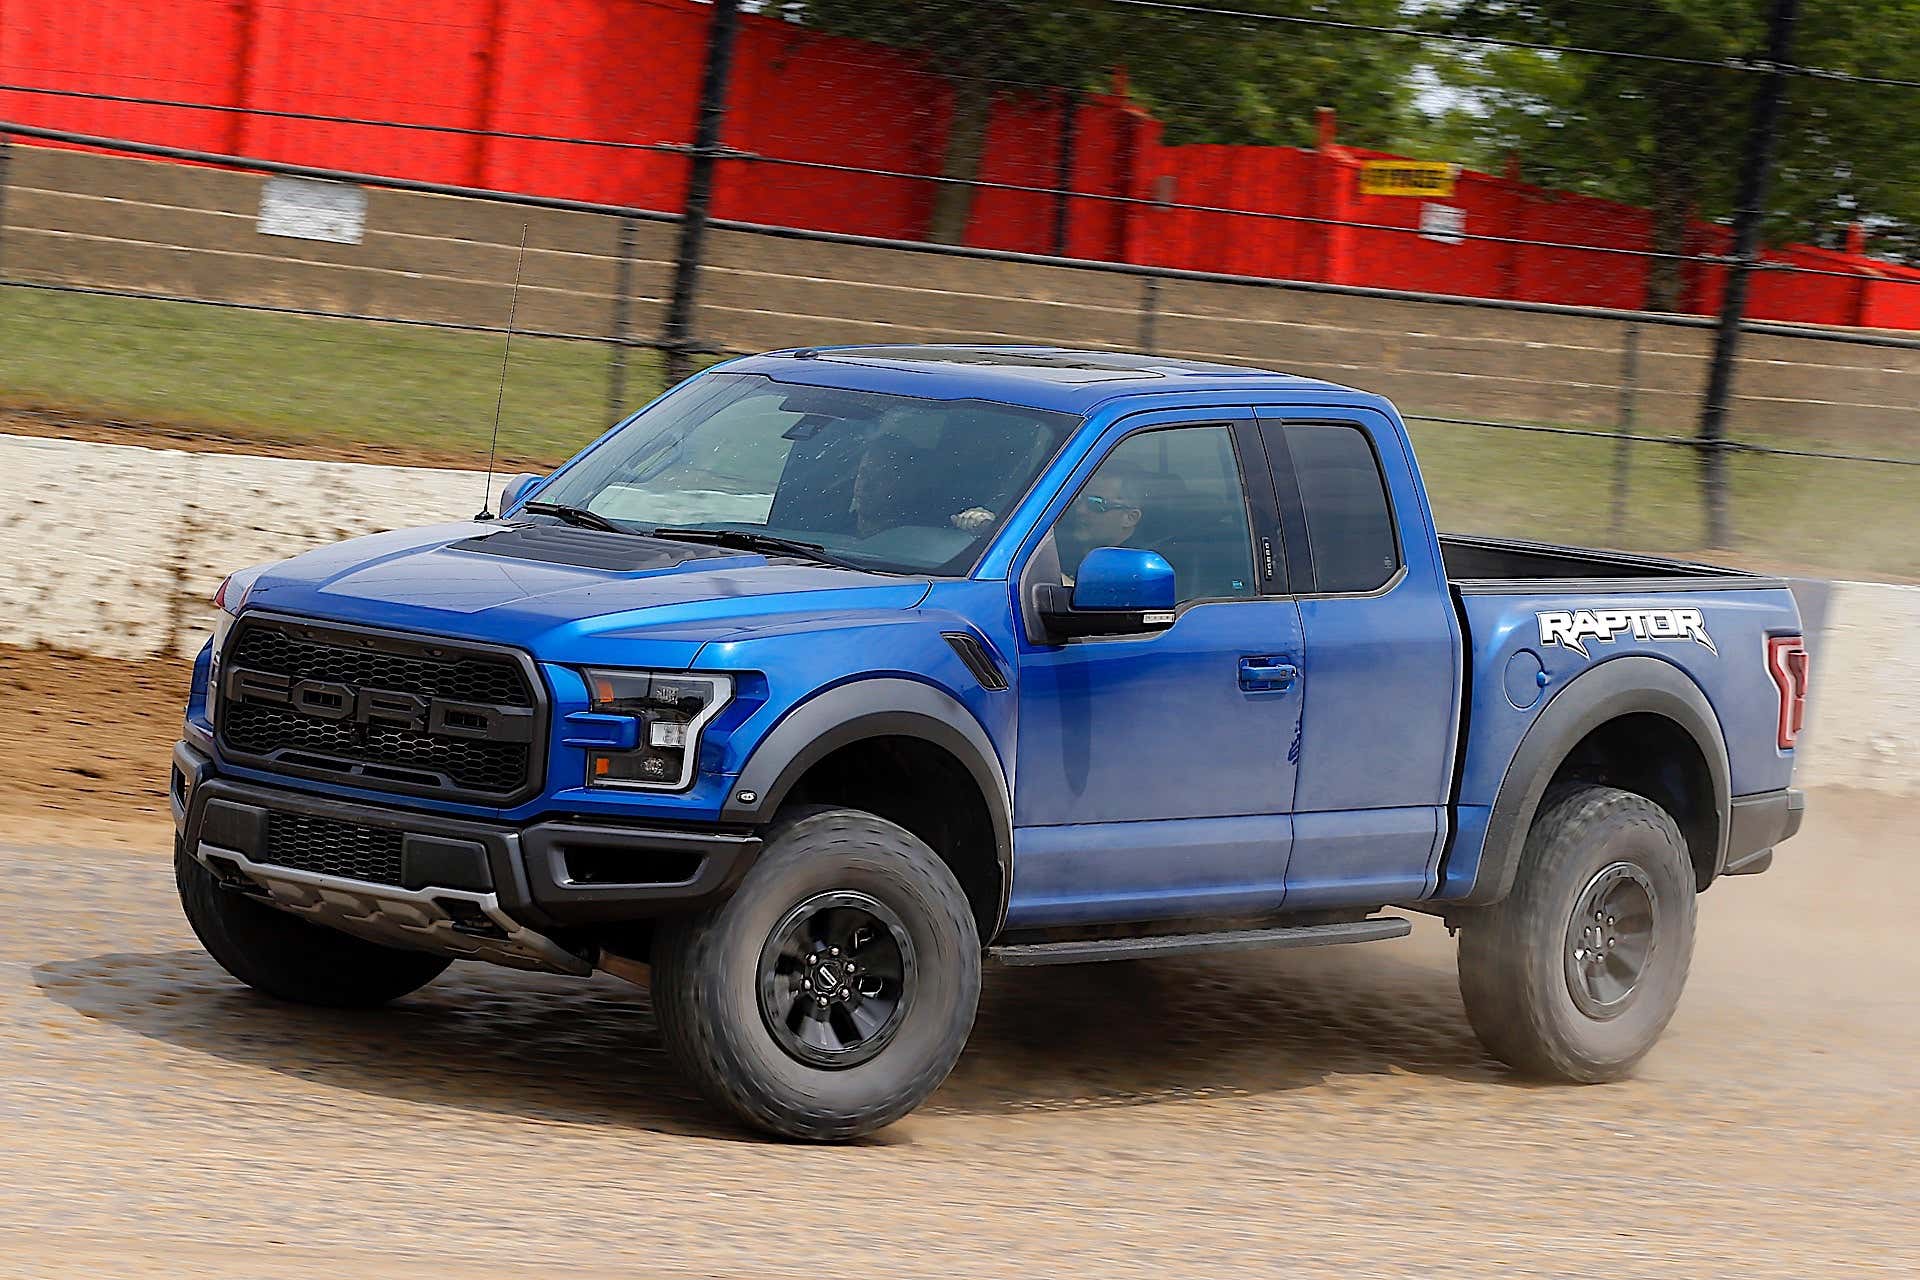 ShelbyPowered Ford Raptor in the Works With GT500 Mustang